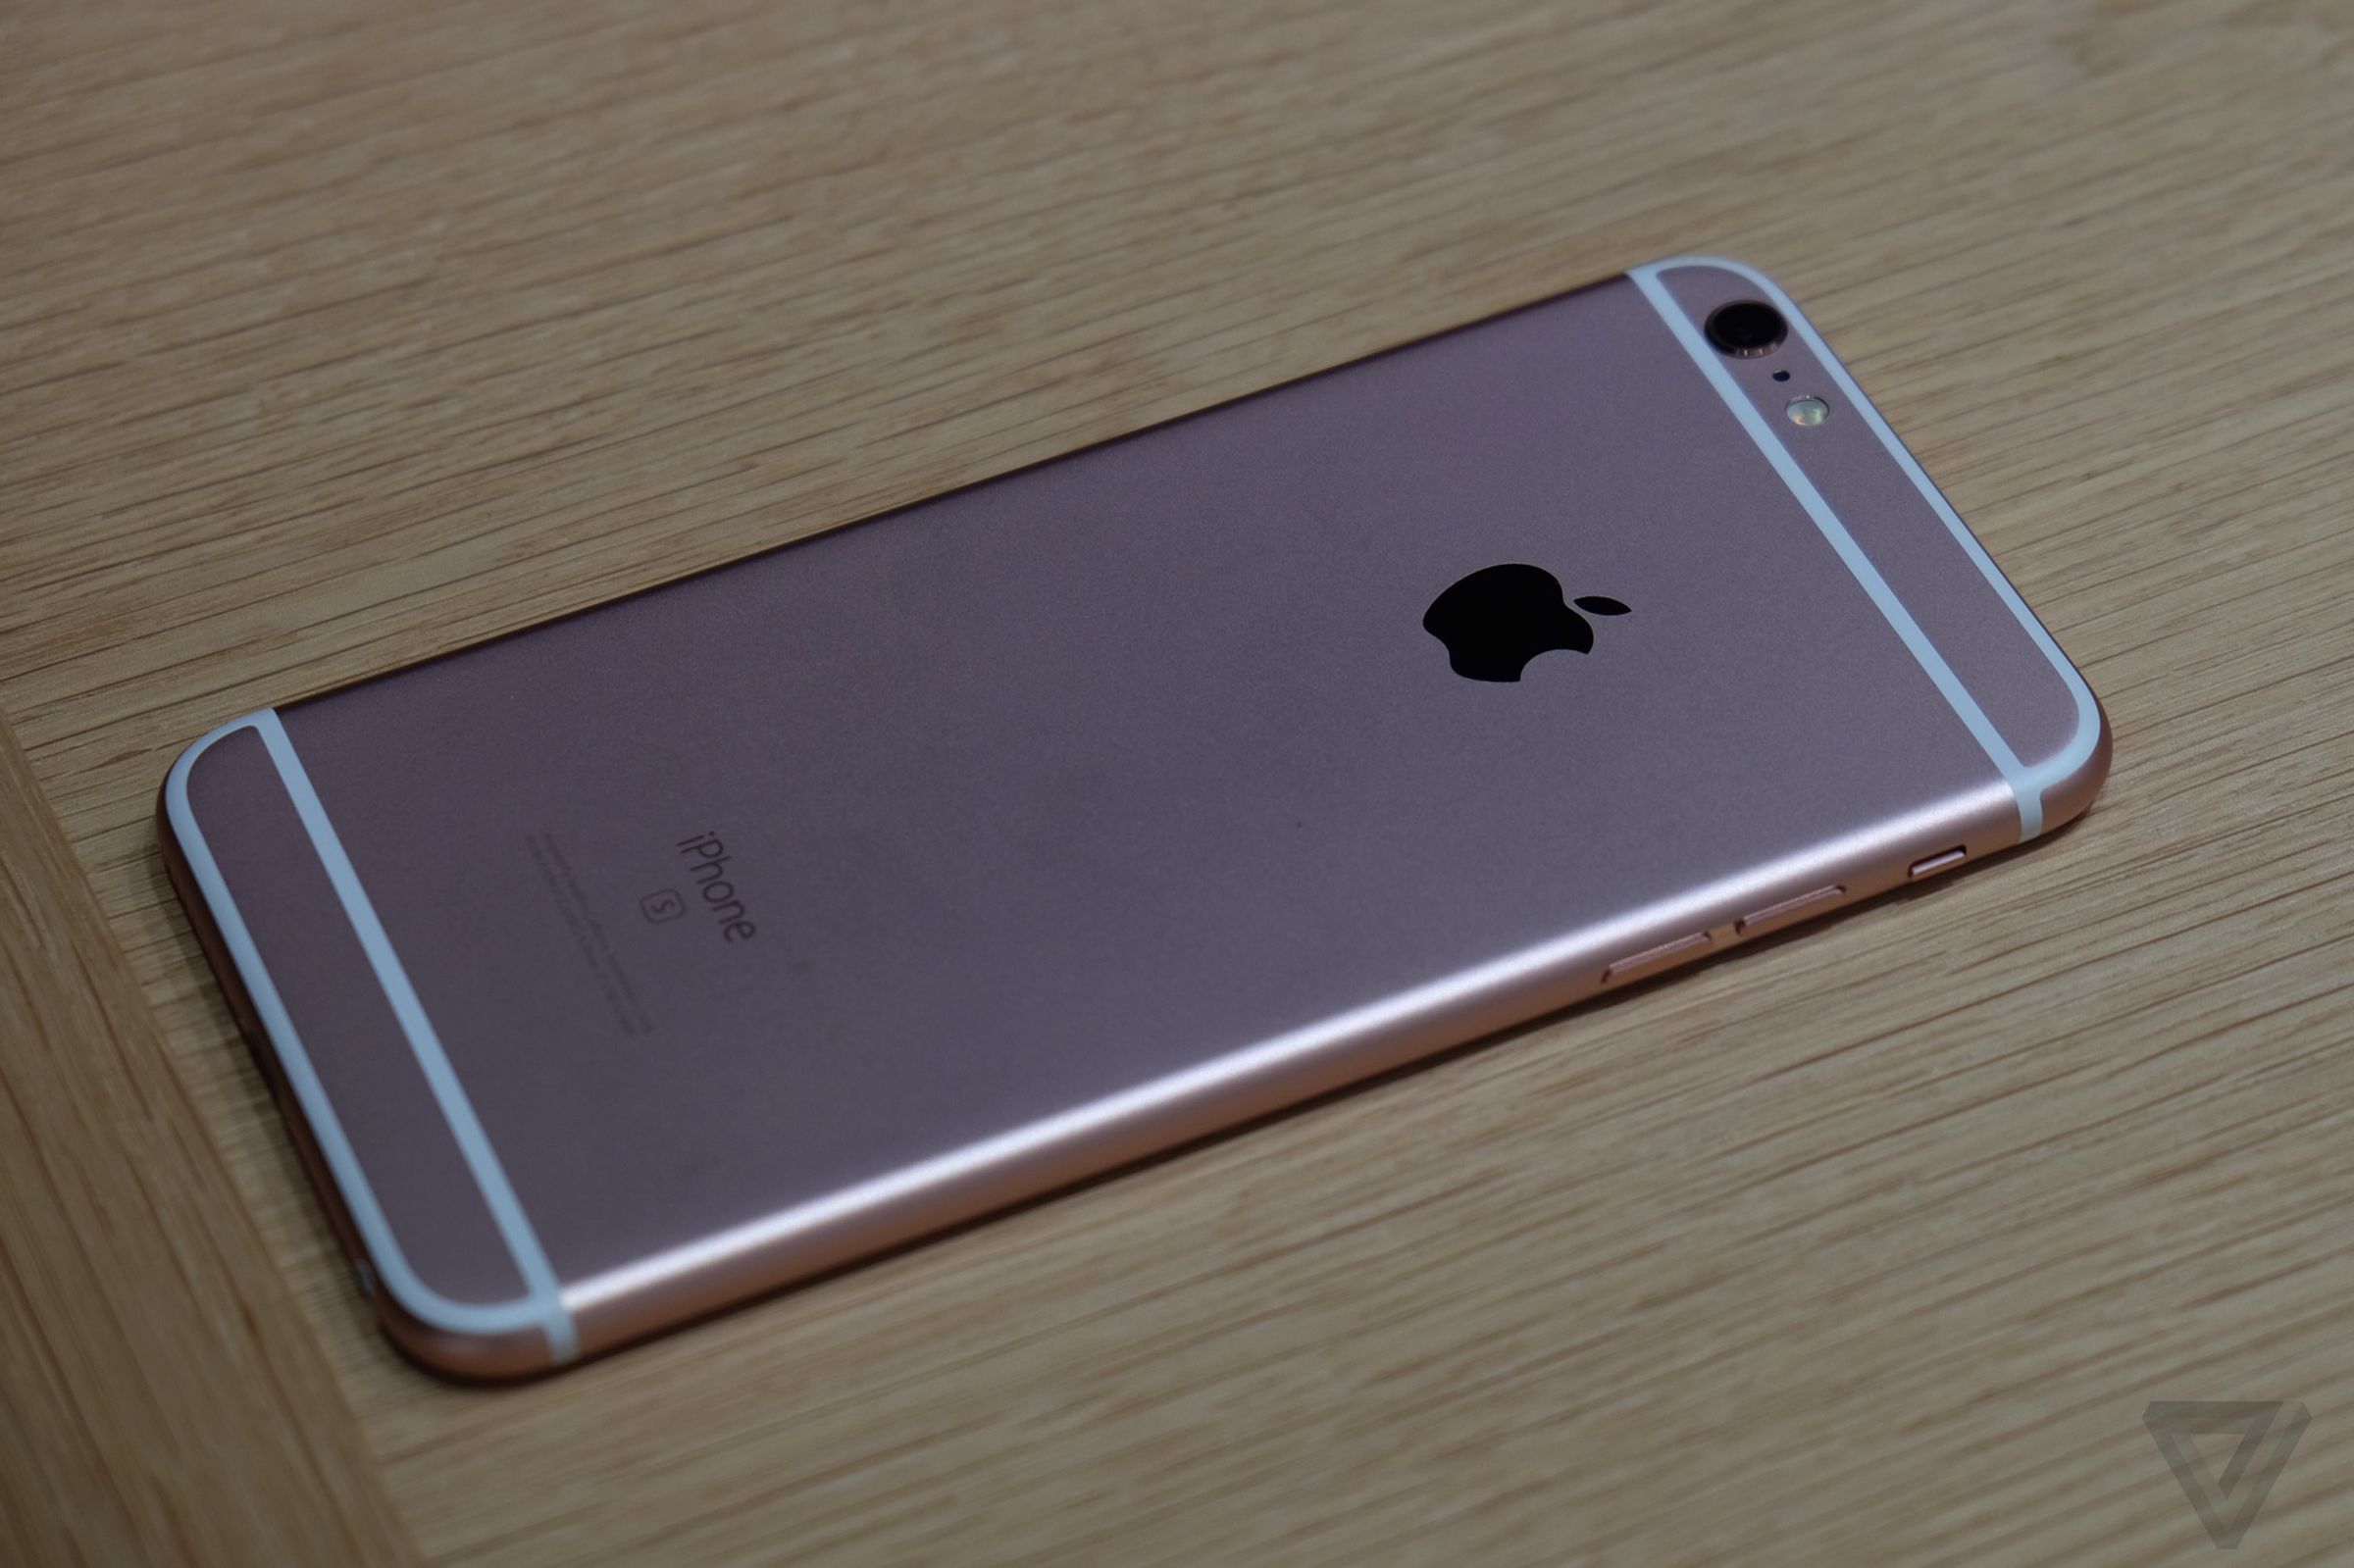 iPhone 6S and 6S Plus hands-on photos